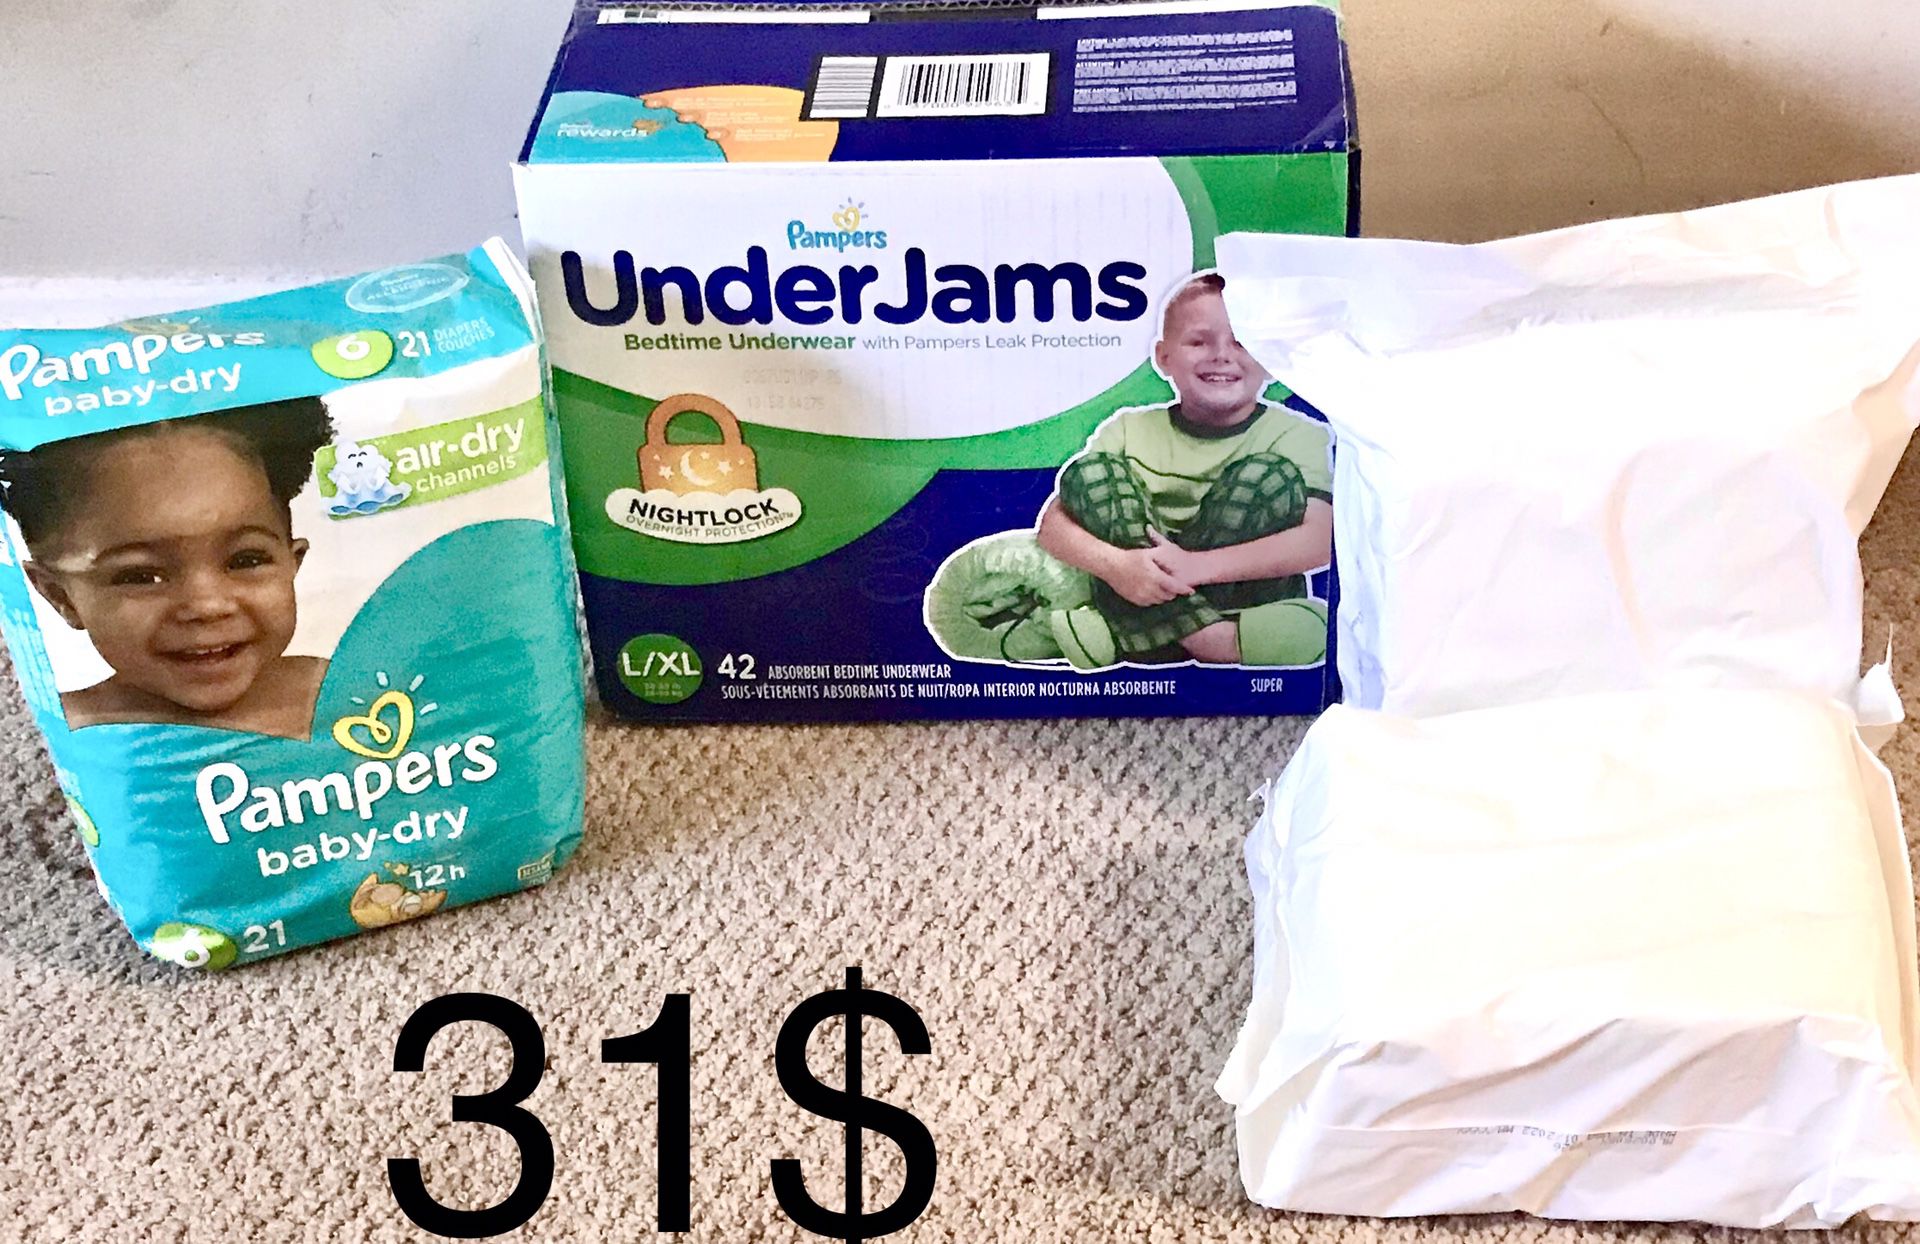 Economy size box of Pampers nightguard pull up Underjams,size 6 pampers & over 400 Huggies natural wipes